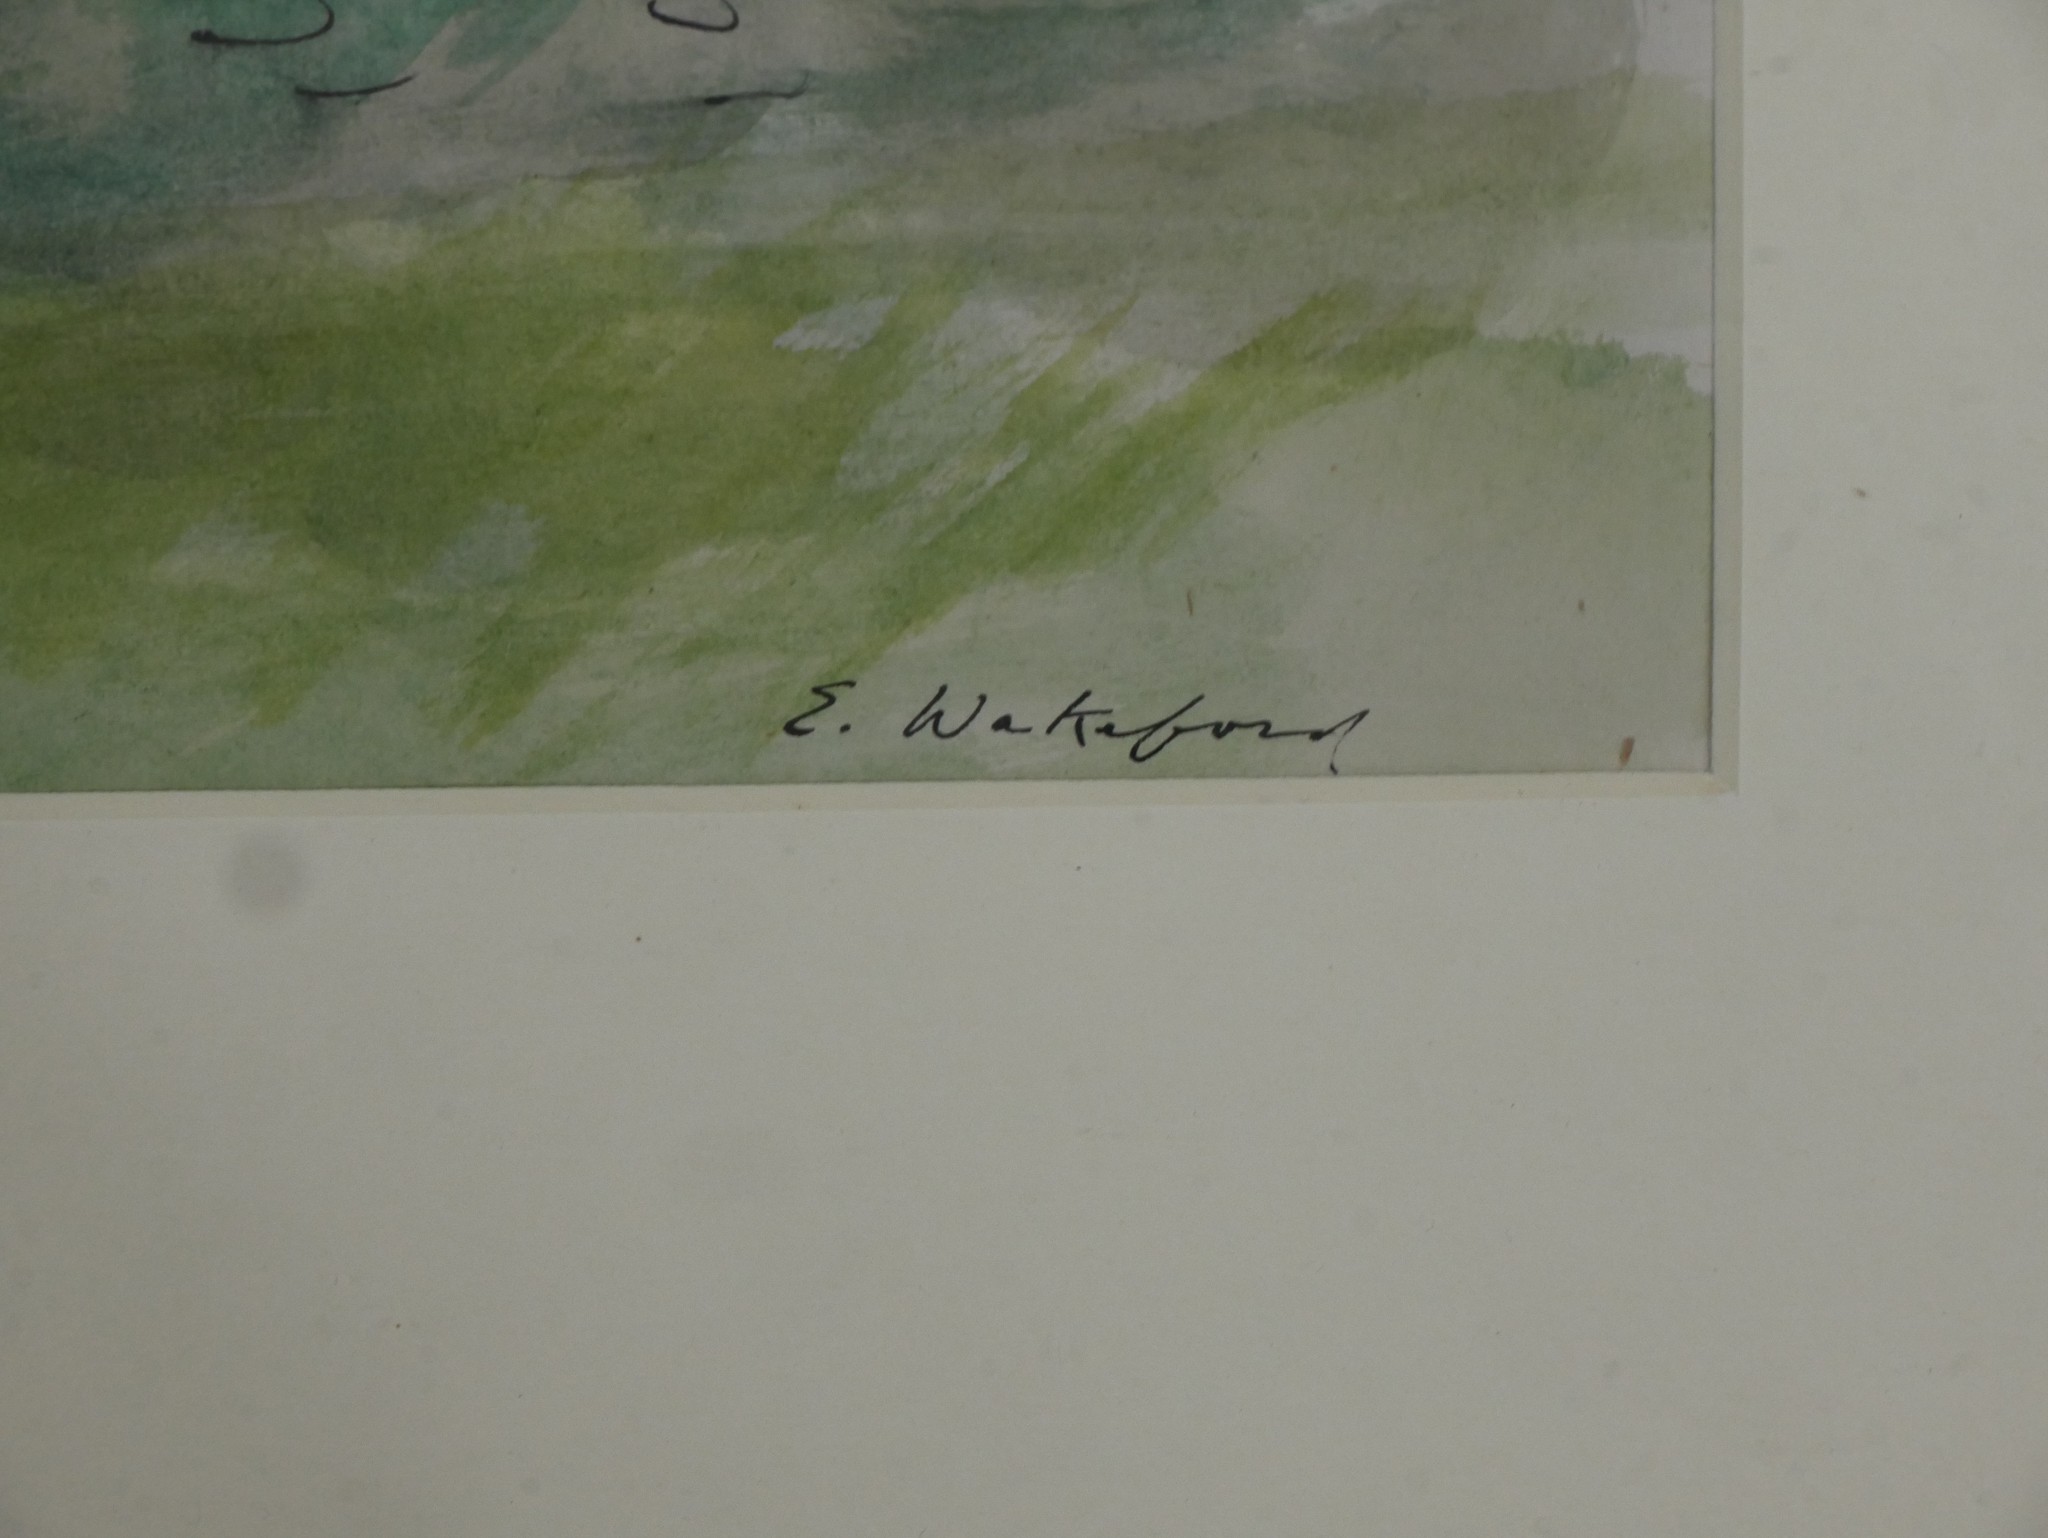 Edward Wakeford (1914-1973), Rural Landscape, watercolour, signed lower right. H.55 W.68.5cm - Image 4 of 6